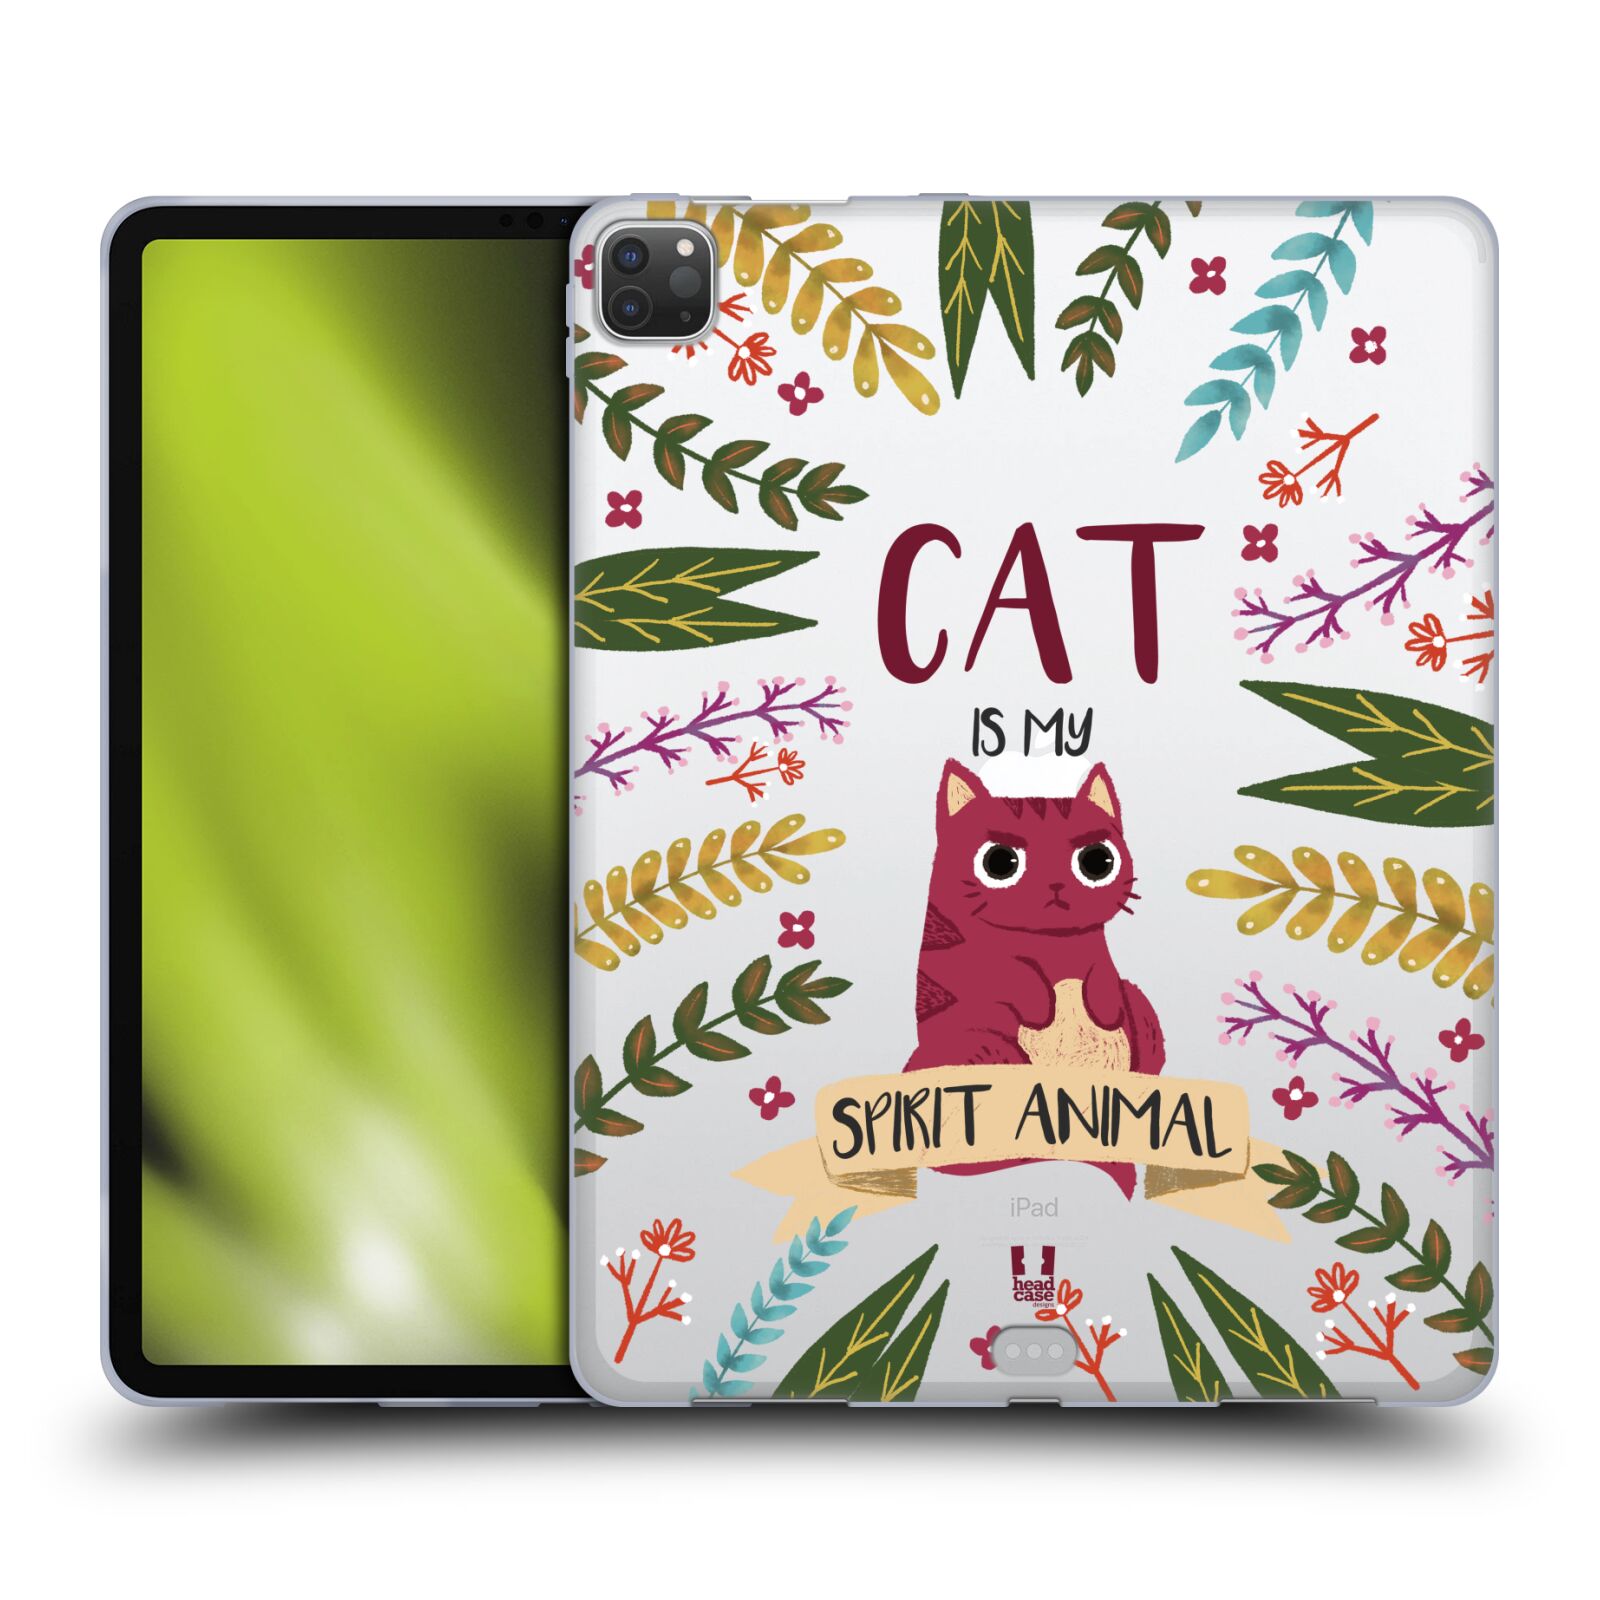 cat wallpaper for kindle